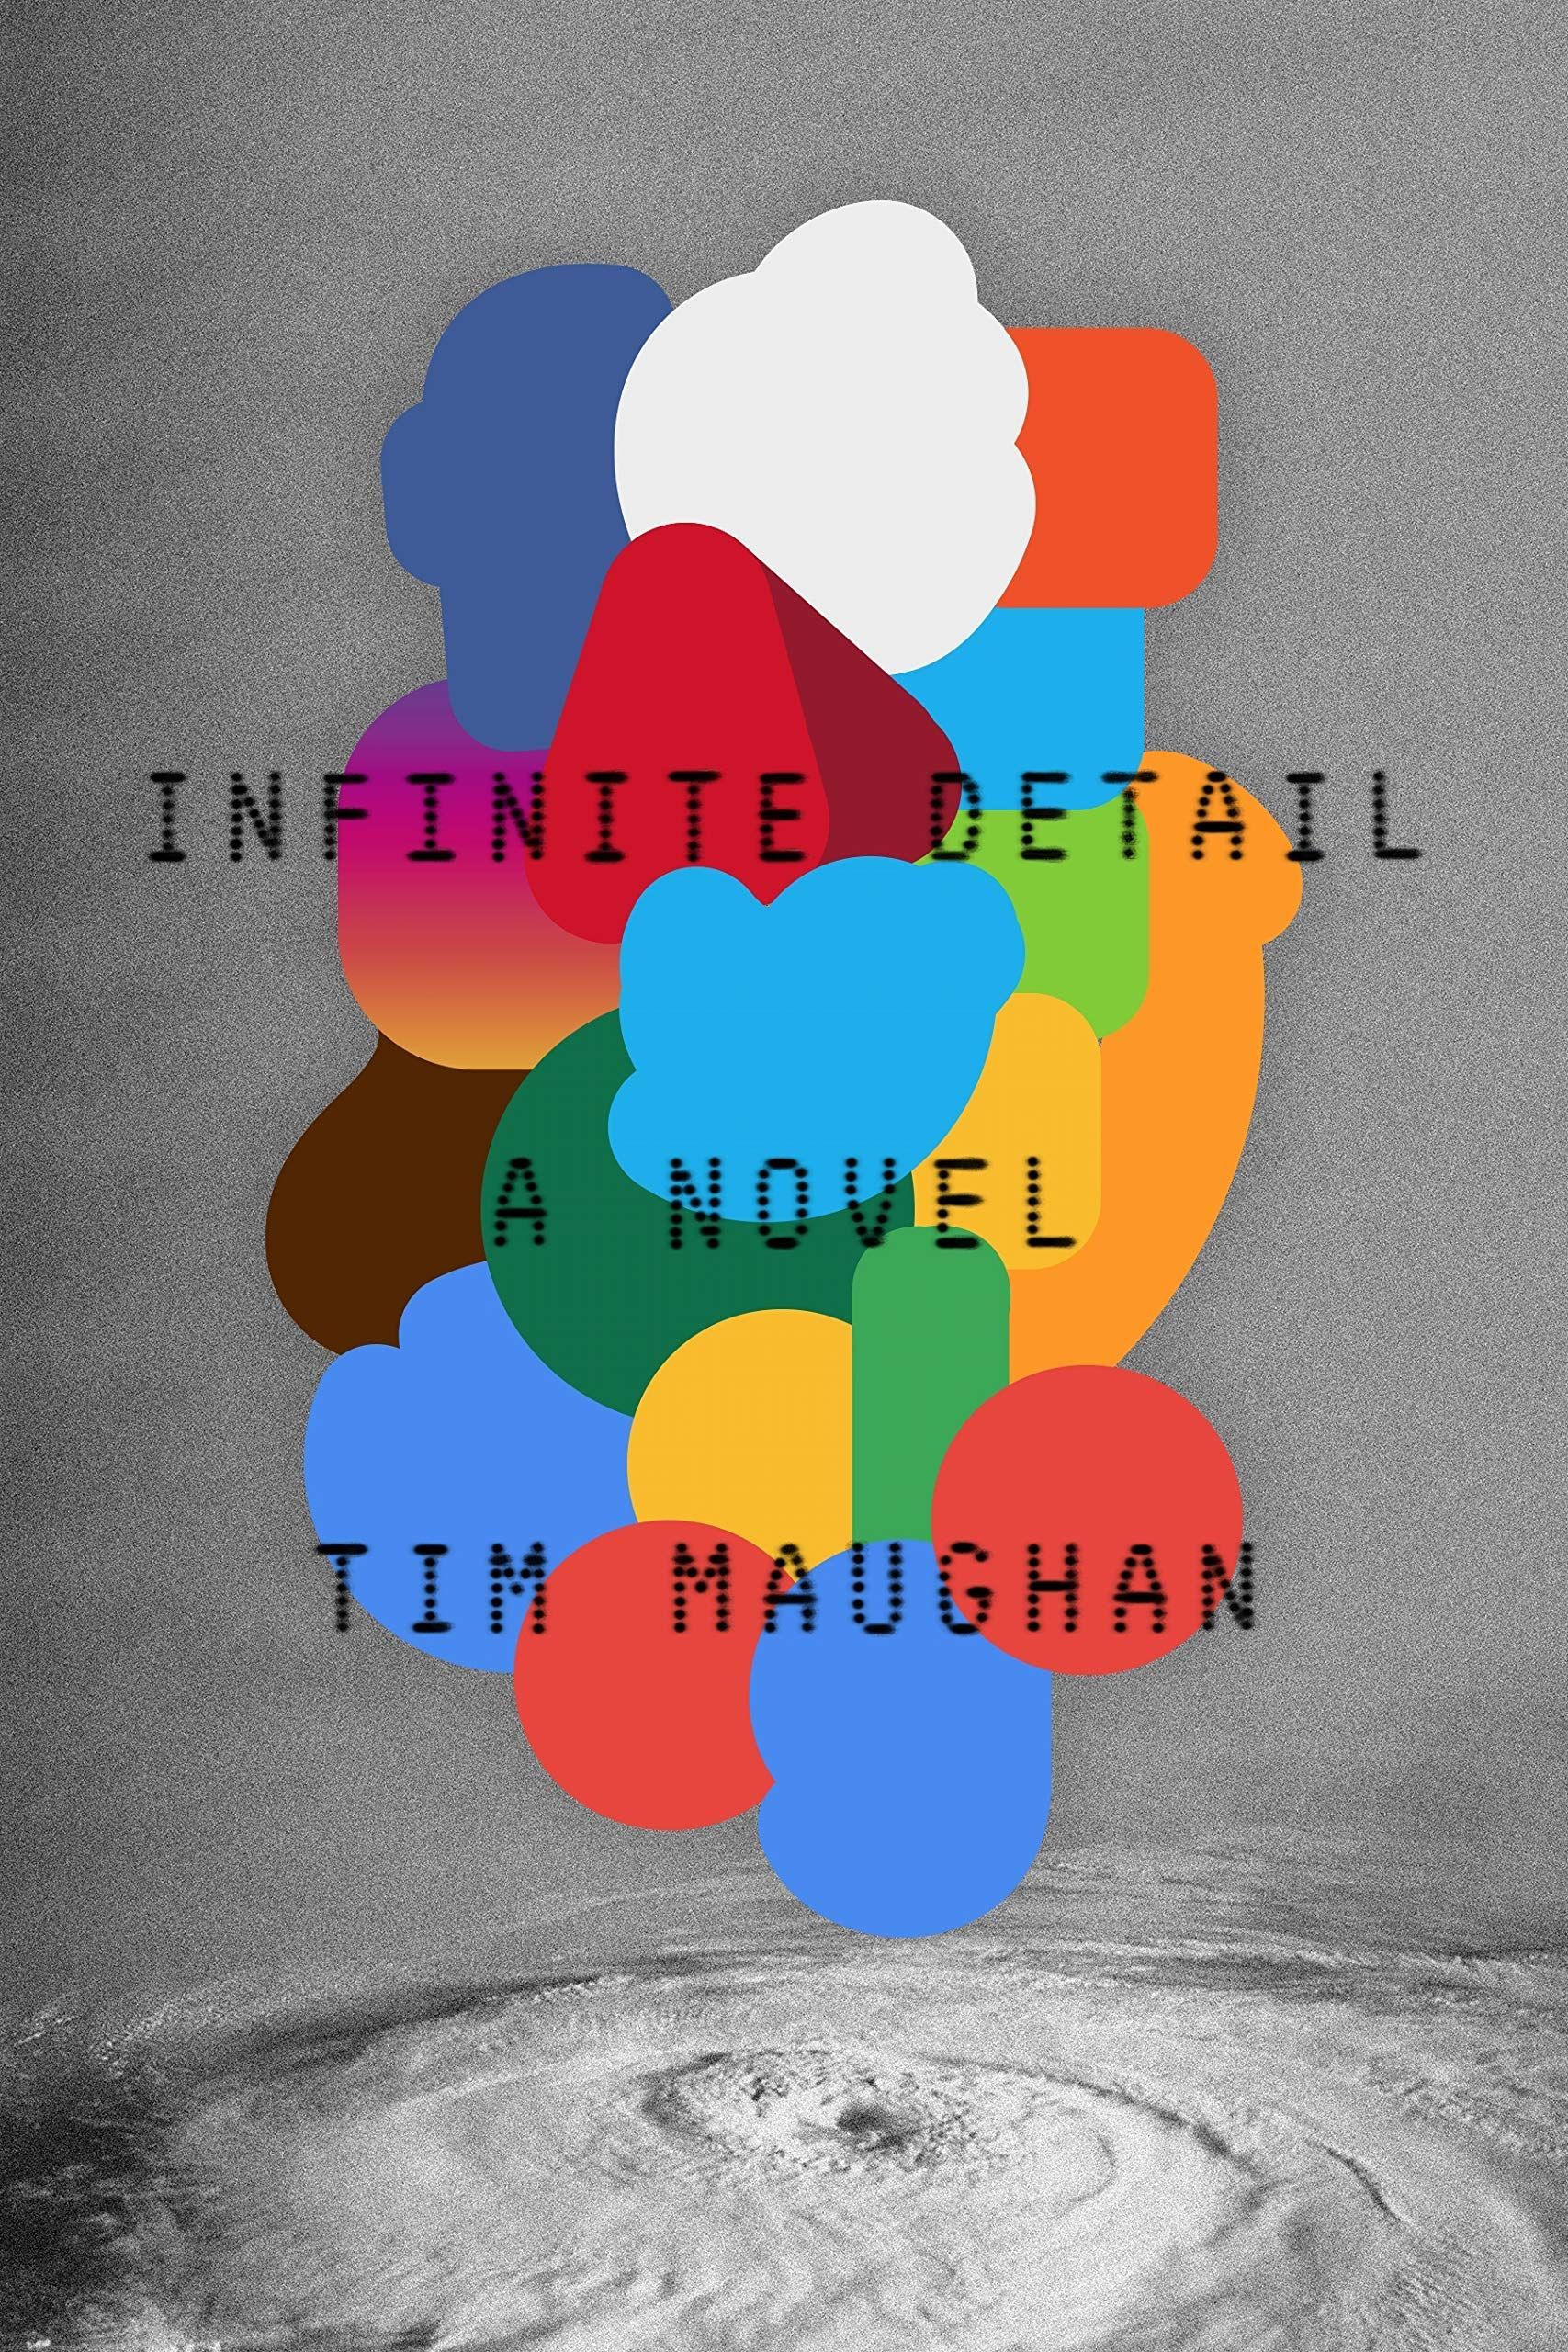 Dance Apocalyptic: Tim Maughan’s “Infinite Detail” and Media After the Internet